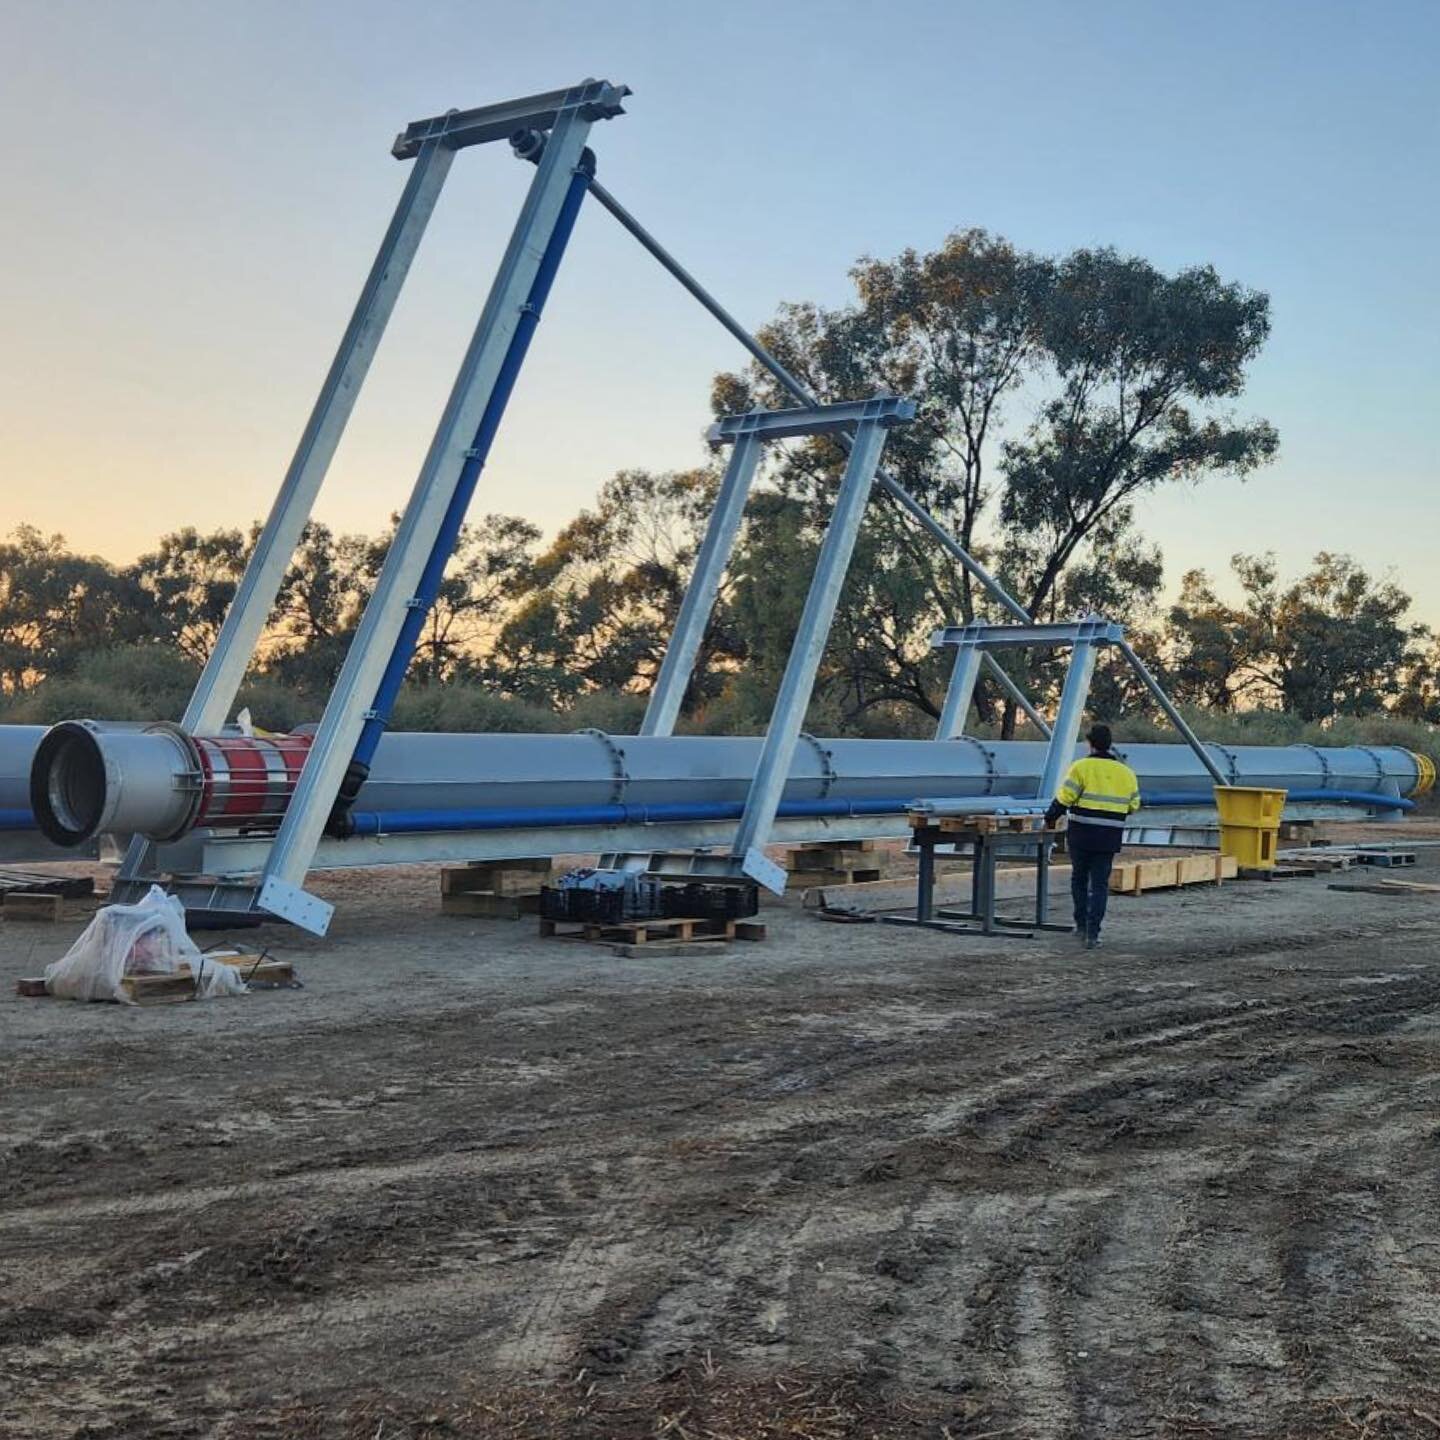 Our Ornel turbine pumps are set and ready to deliver some great work at the Millewa project for @lowermurraywater 
Thanks to our team and the great collaboration we were able to finish up this project!

#manufacturing #engineering #engineer #pump #or